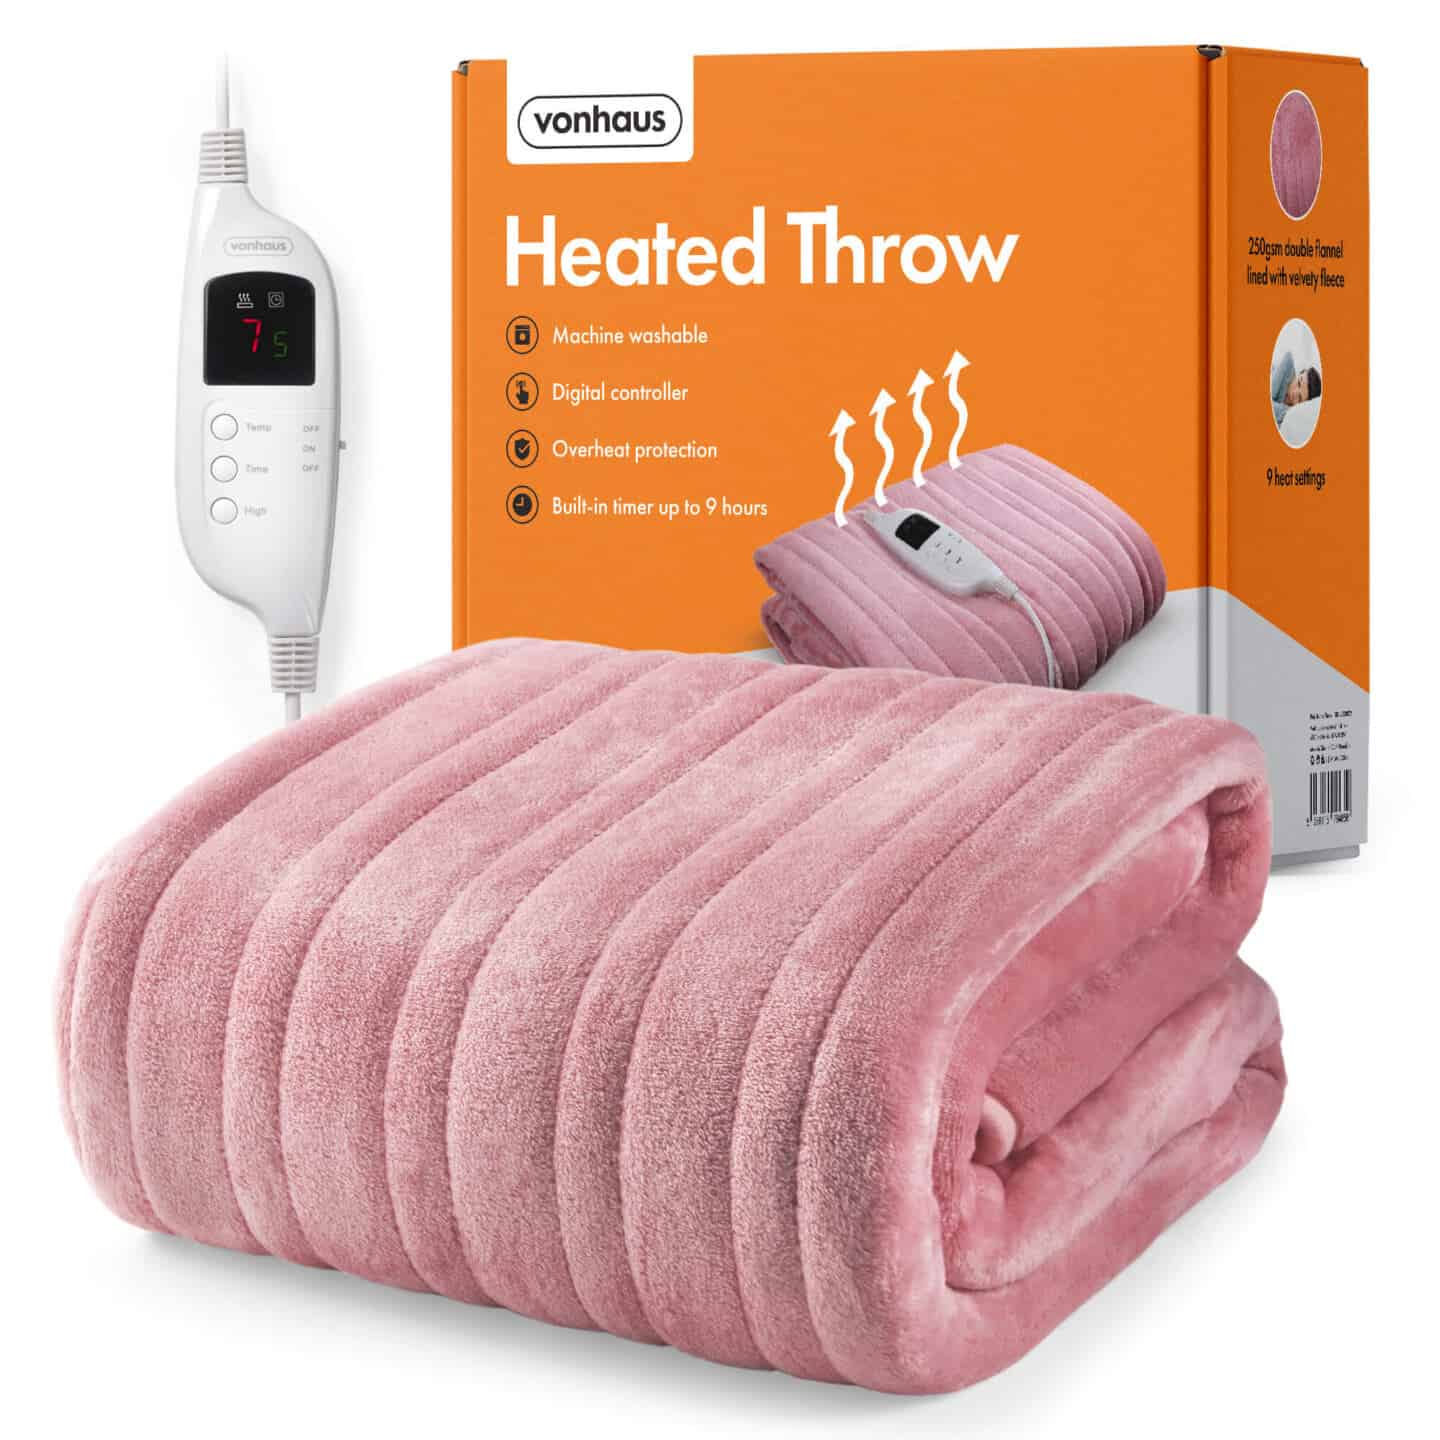 An electric blanket in front of the box it came in